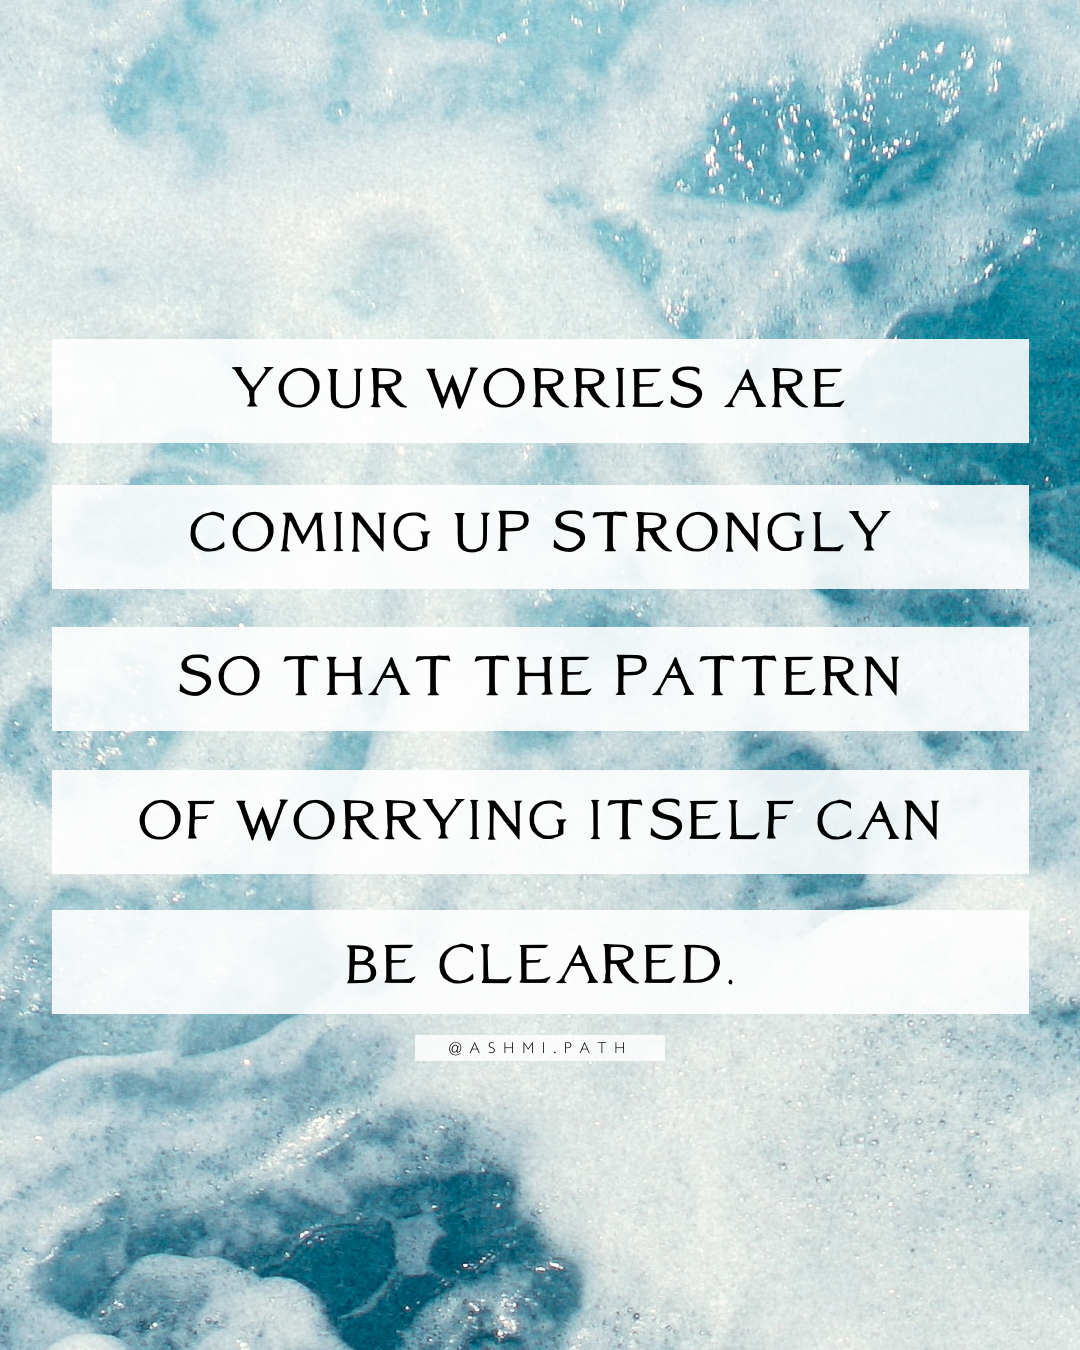 Why Your Worries Are Coming Up Strongly